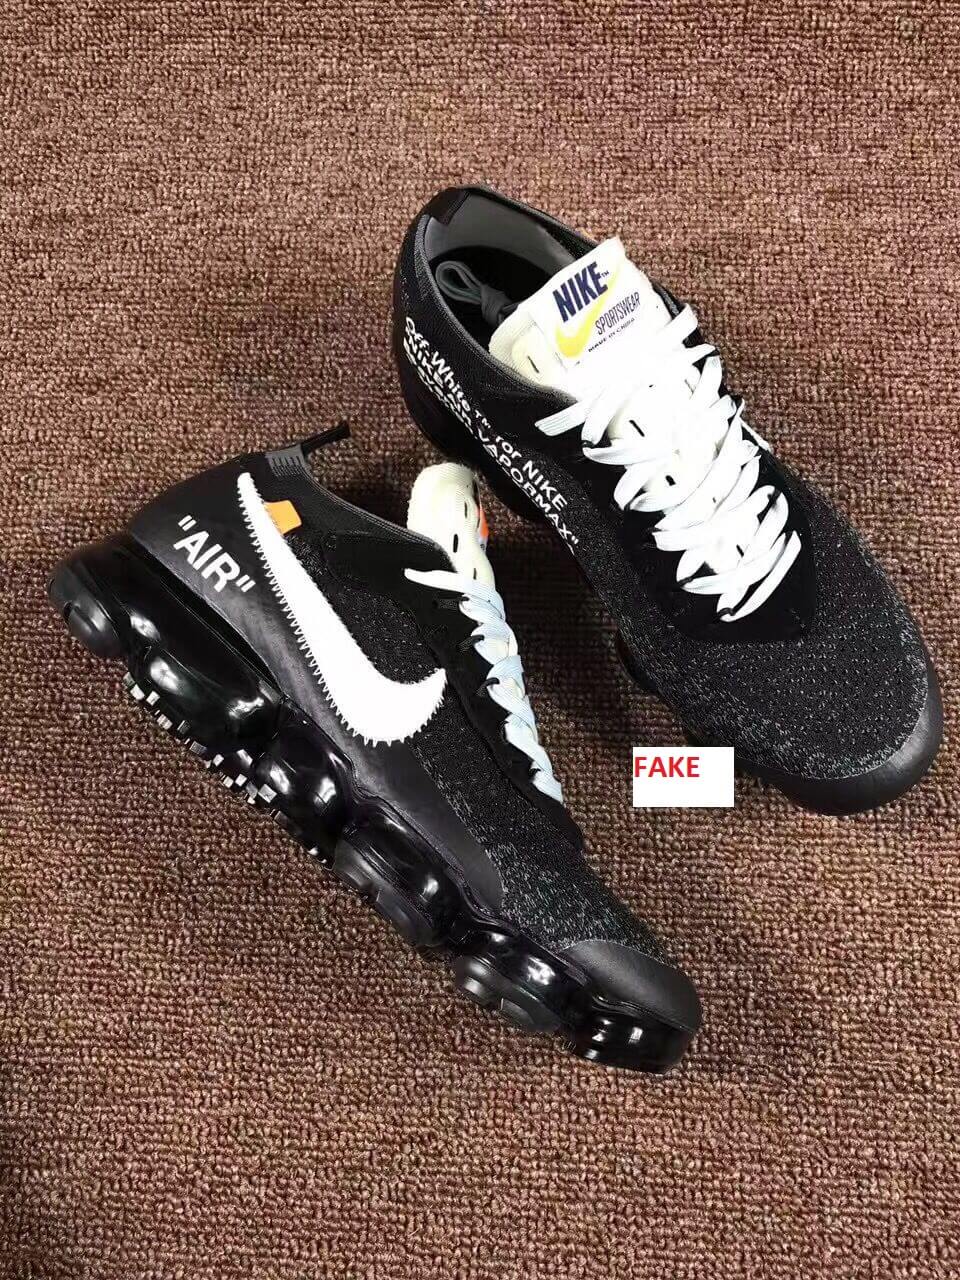 real off white vapormax